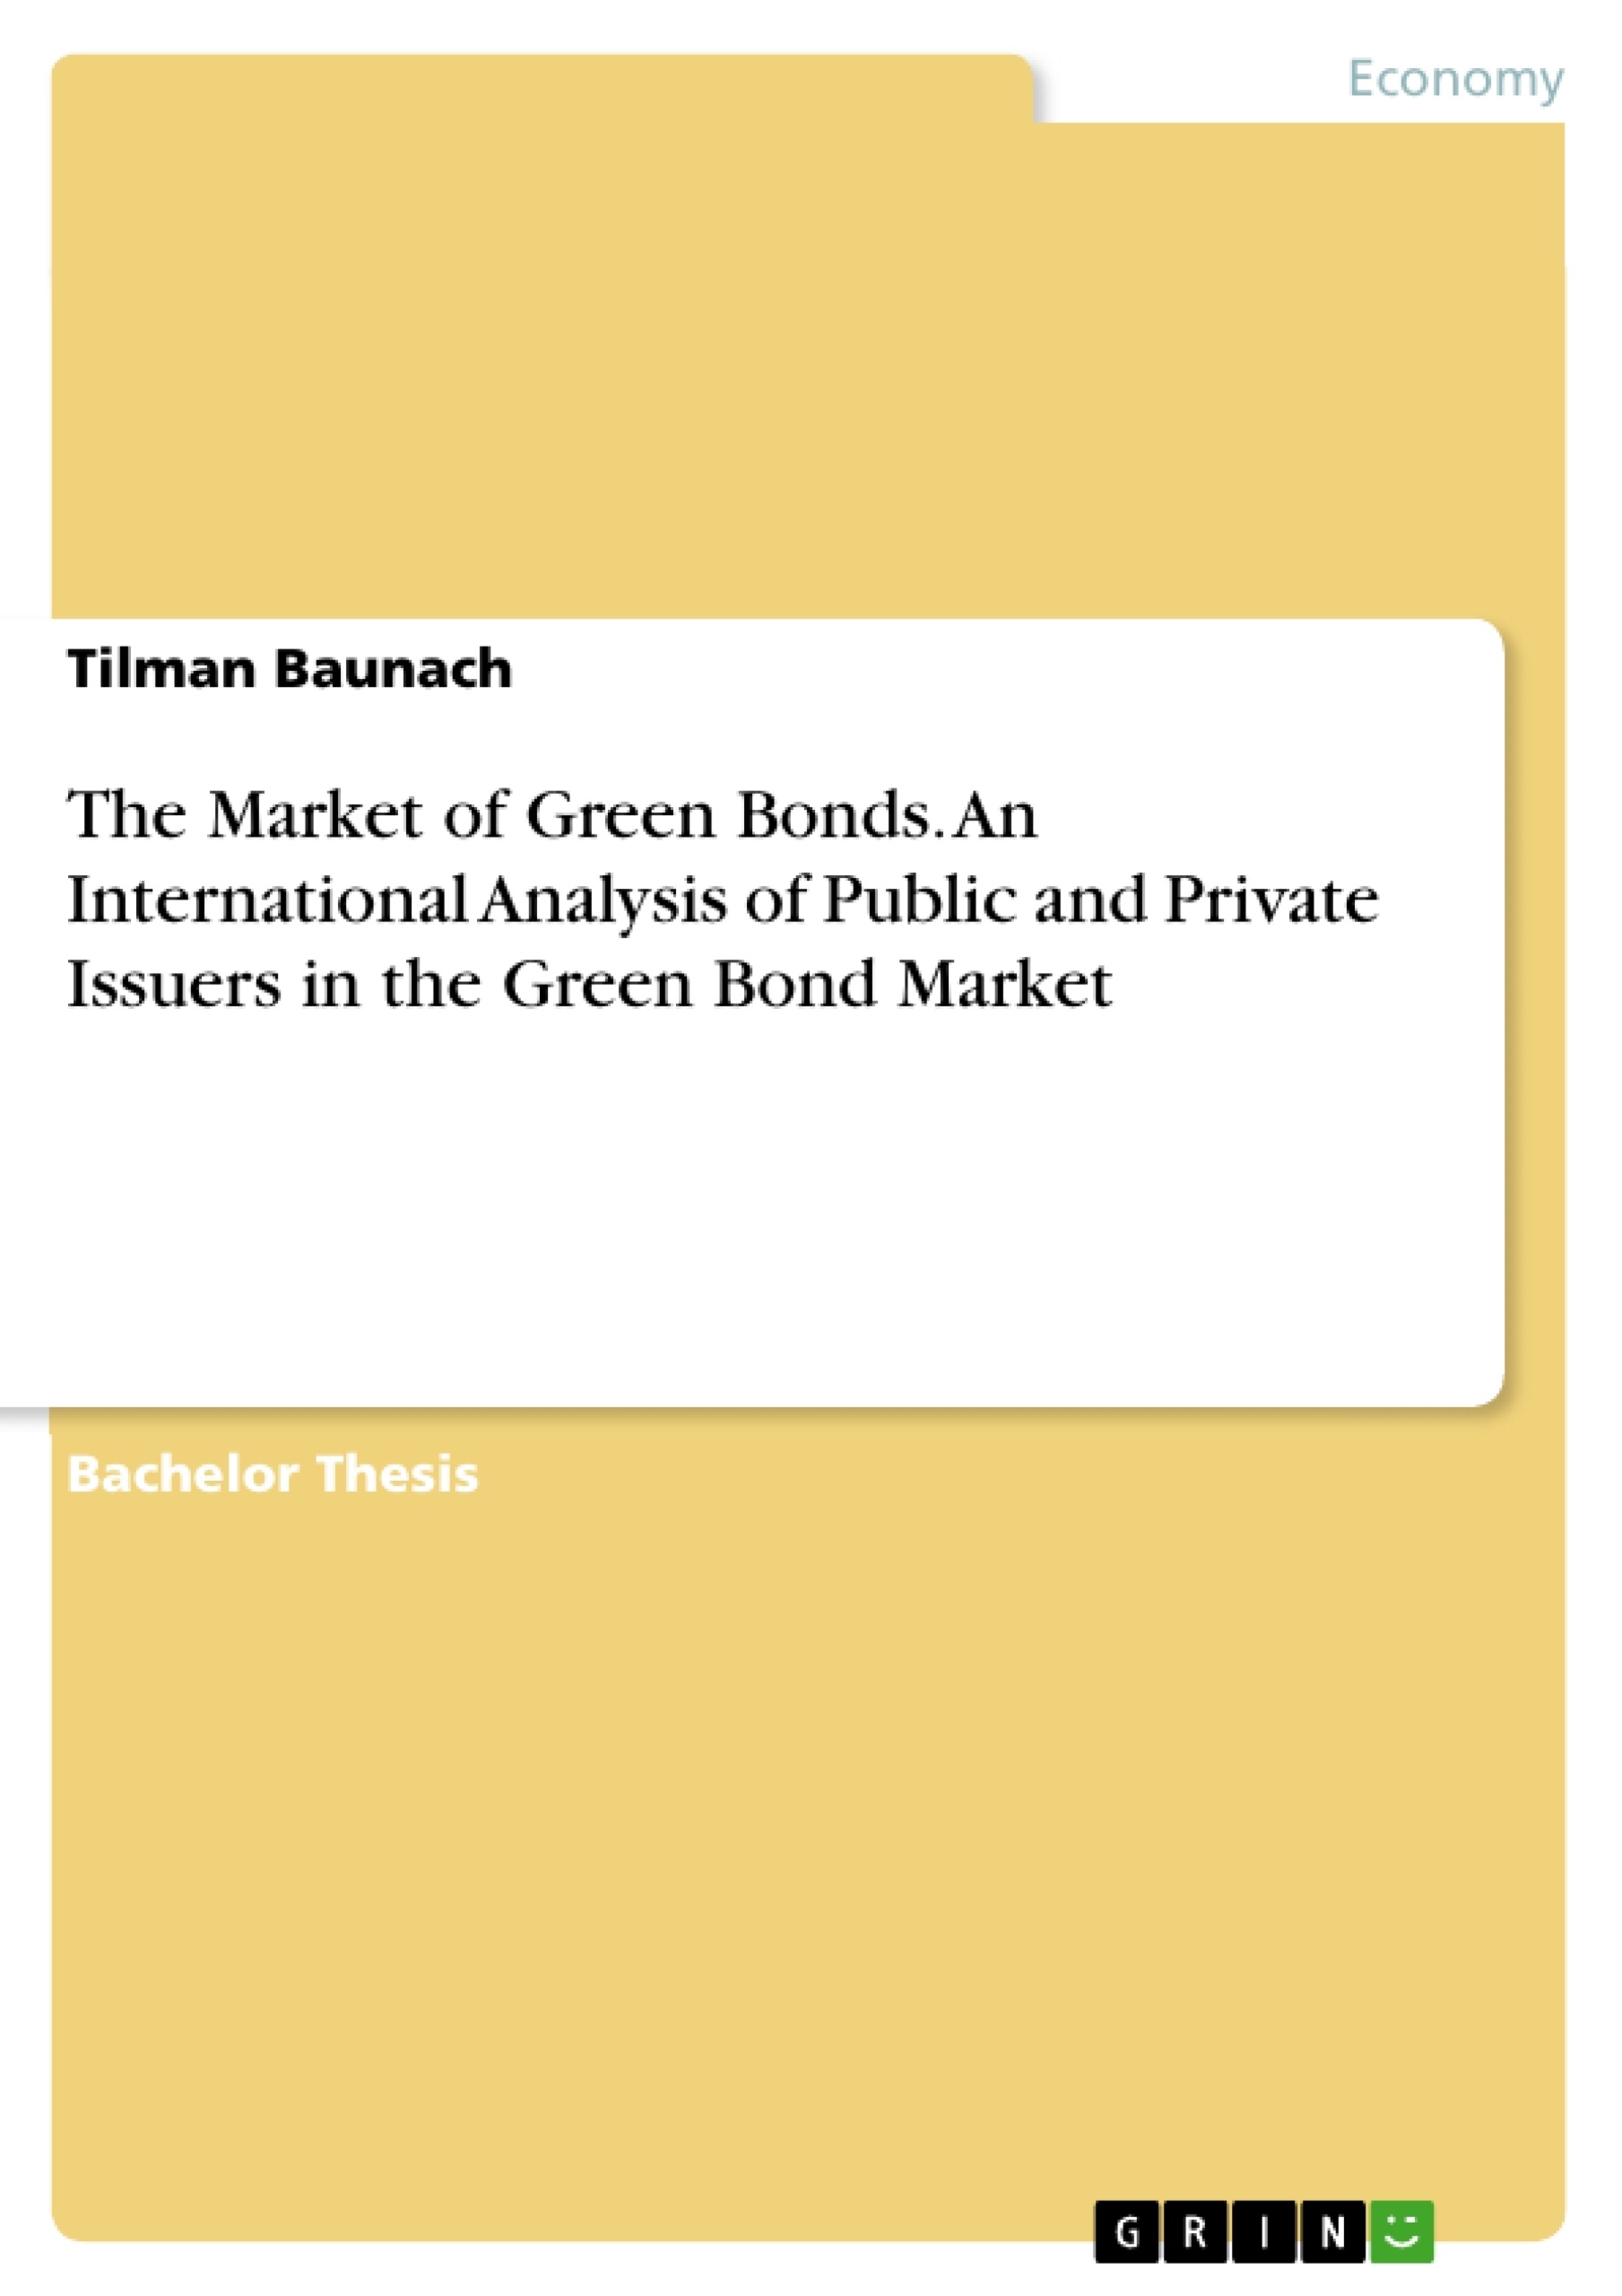 Titre: The Market of Green Bonds. An International Analysis of Public and Private Issuers in the Green Bond Market